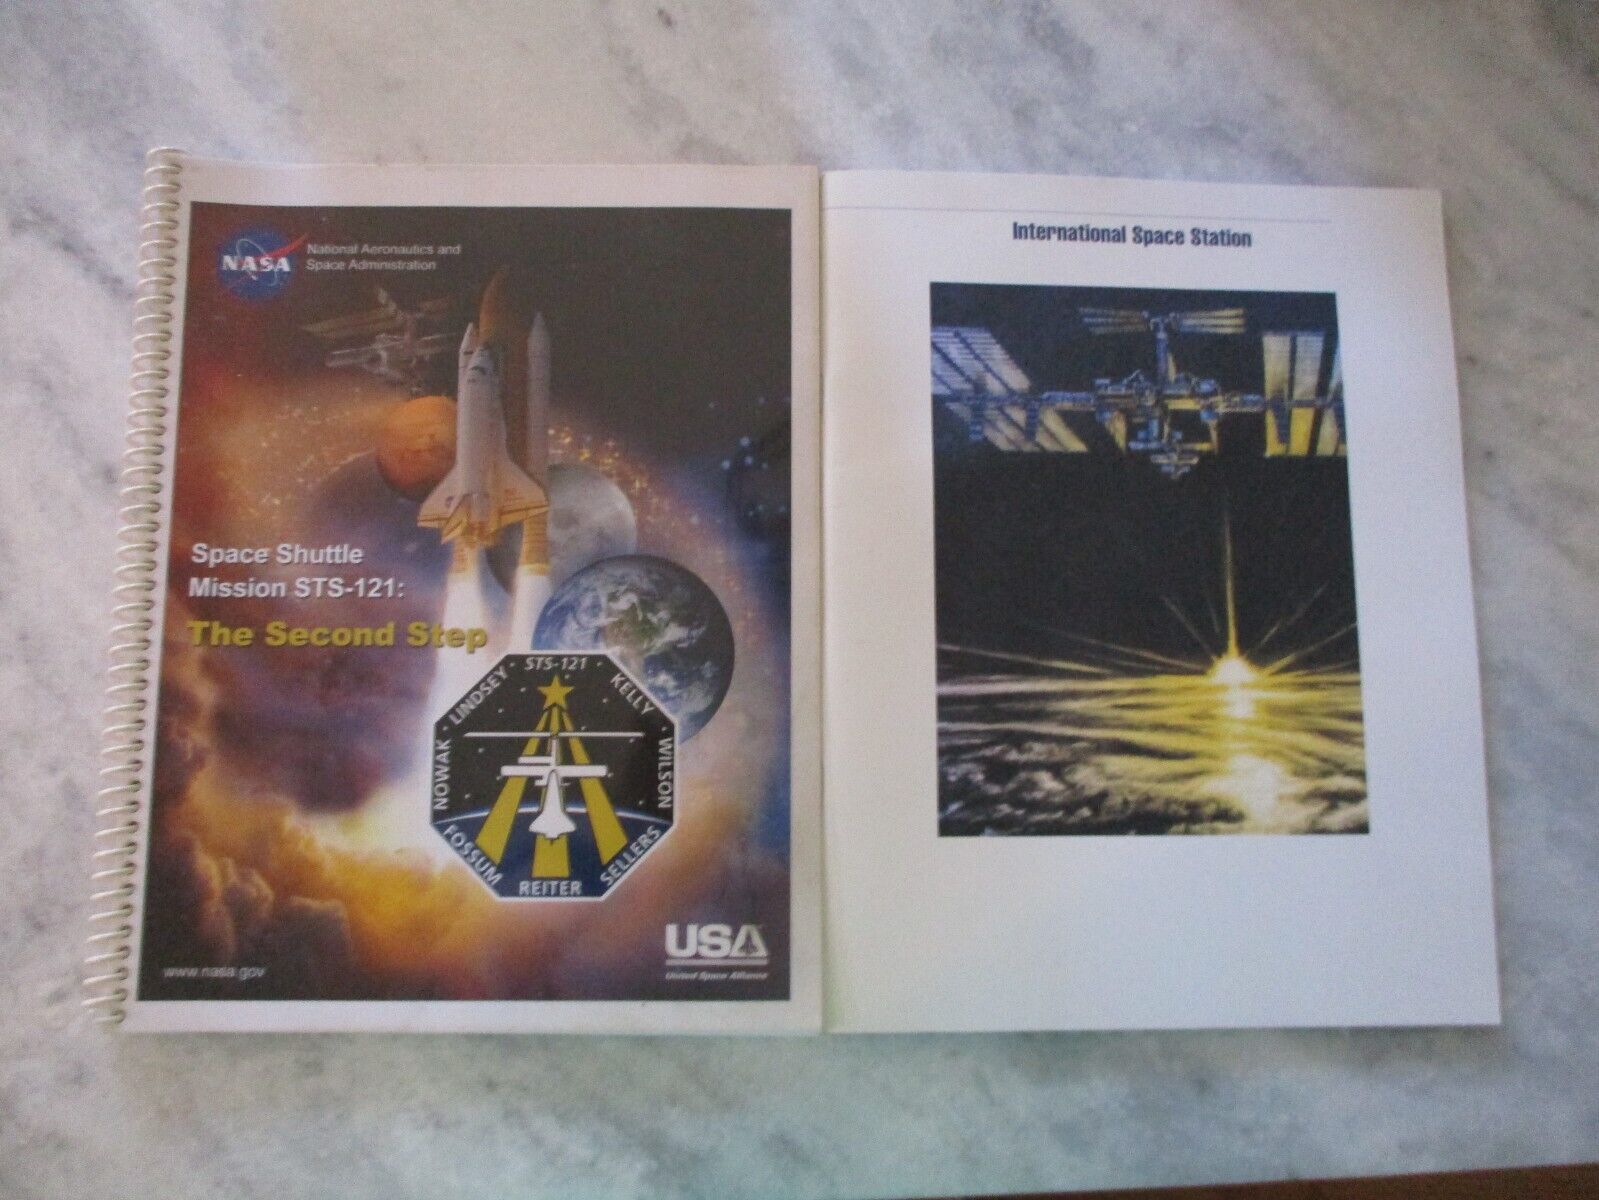 NASA BOEING 1994/2006 SPACE SHUTTLE STS-121 - INTERNATIONAL SPACE STATION BOOKS